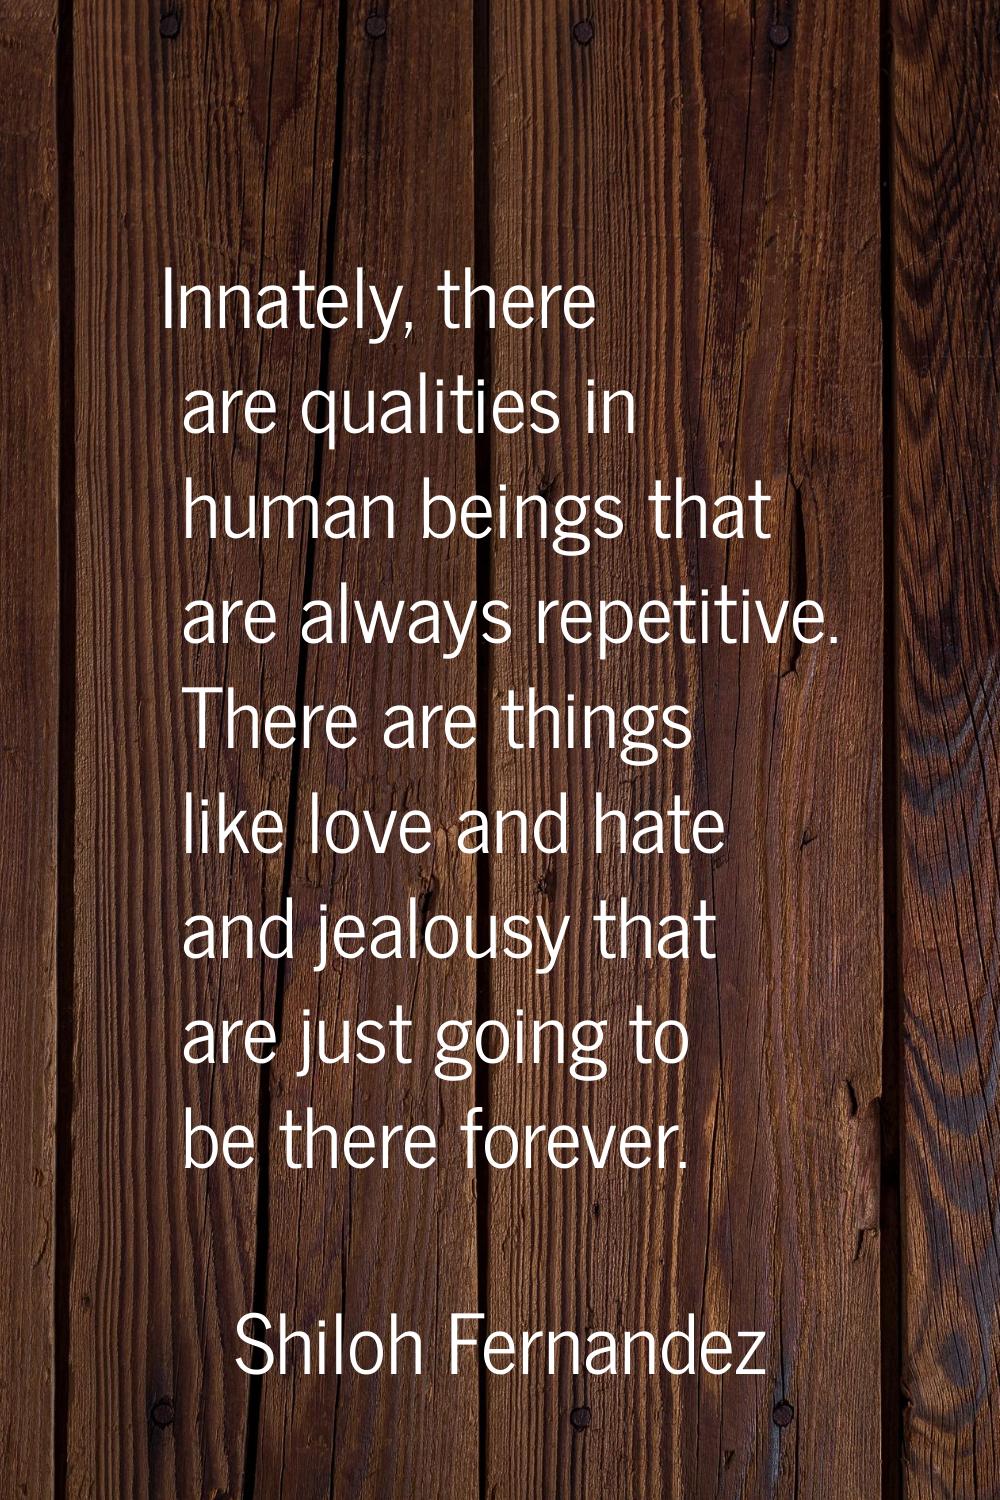 Innately, there are qualities in human beings that are always repetitive. There are things like lov